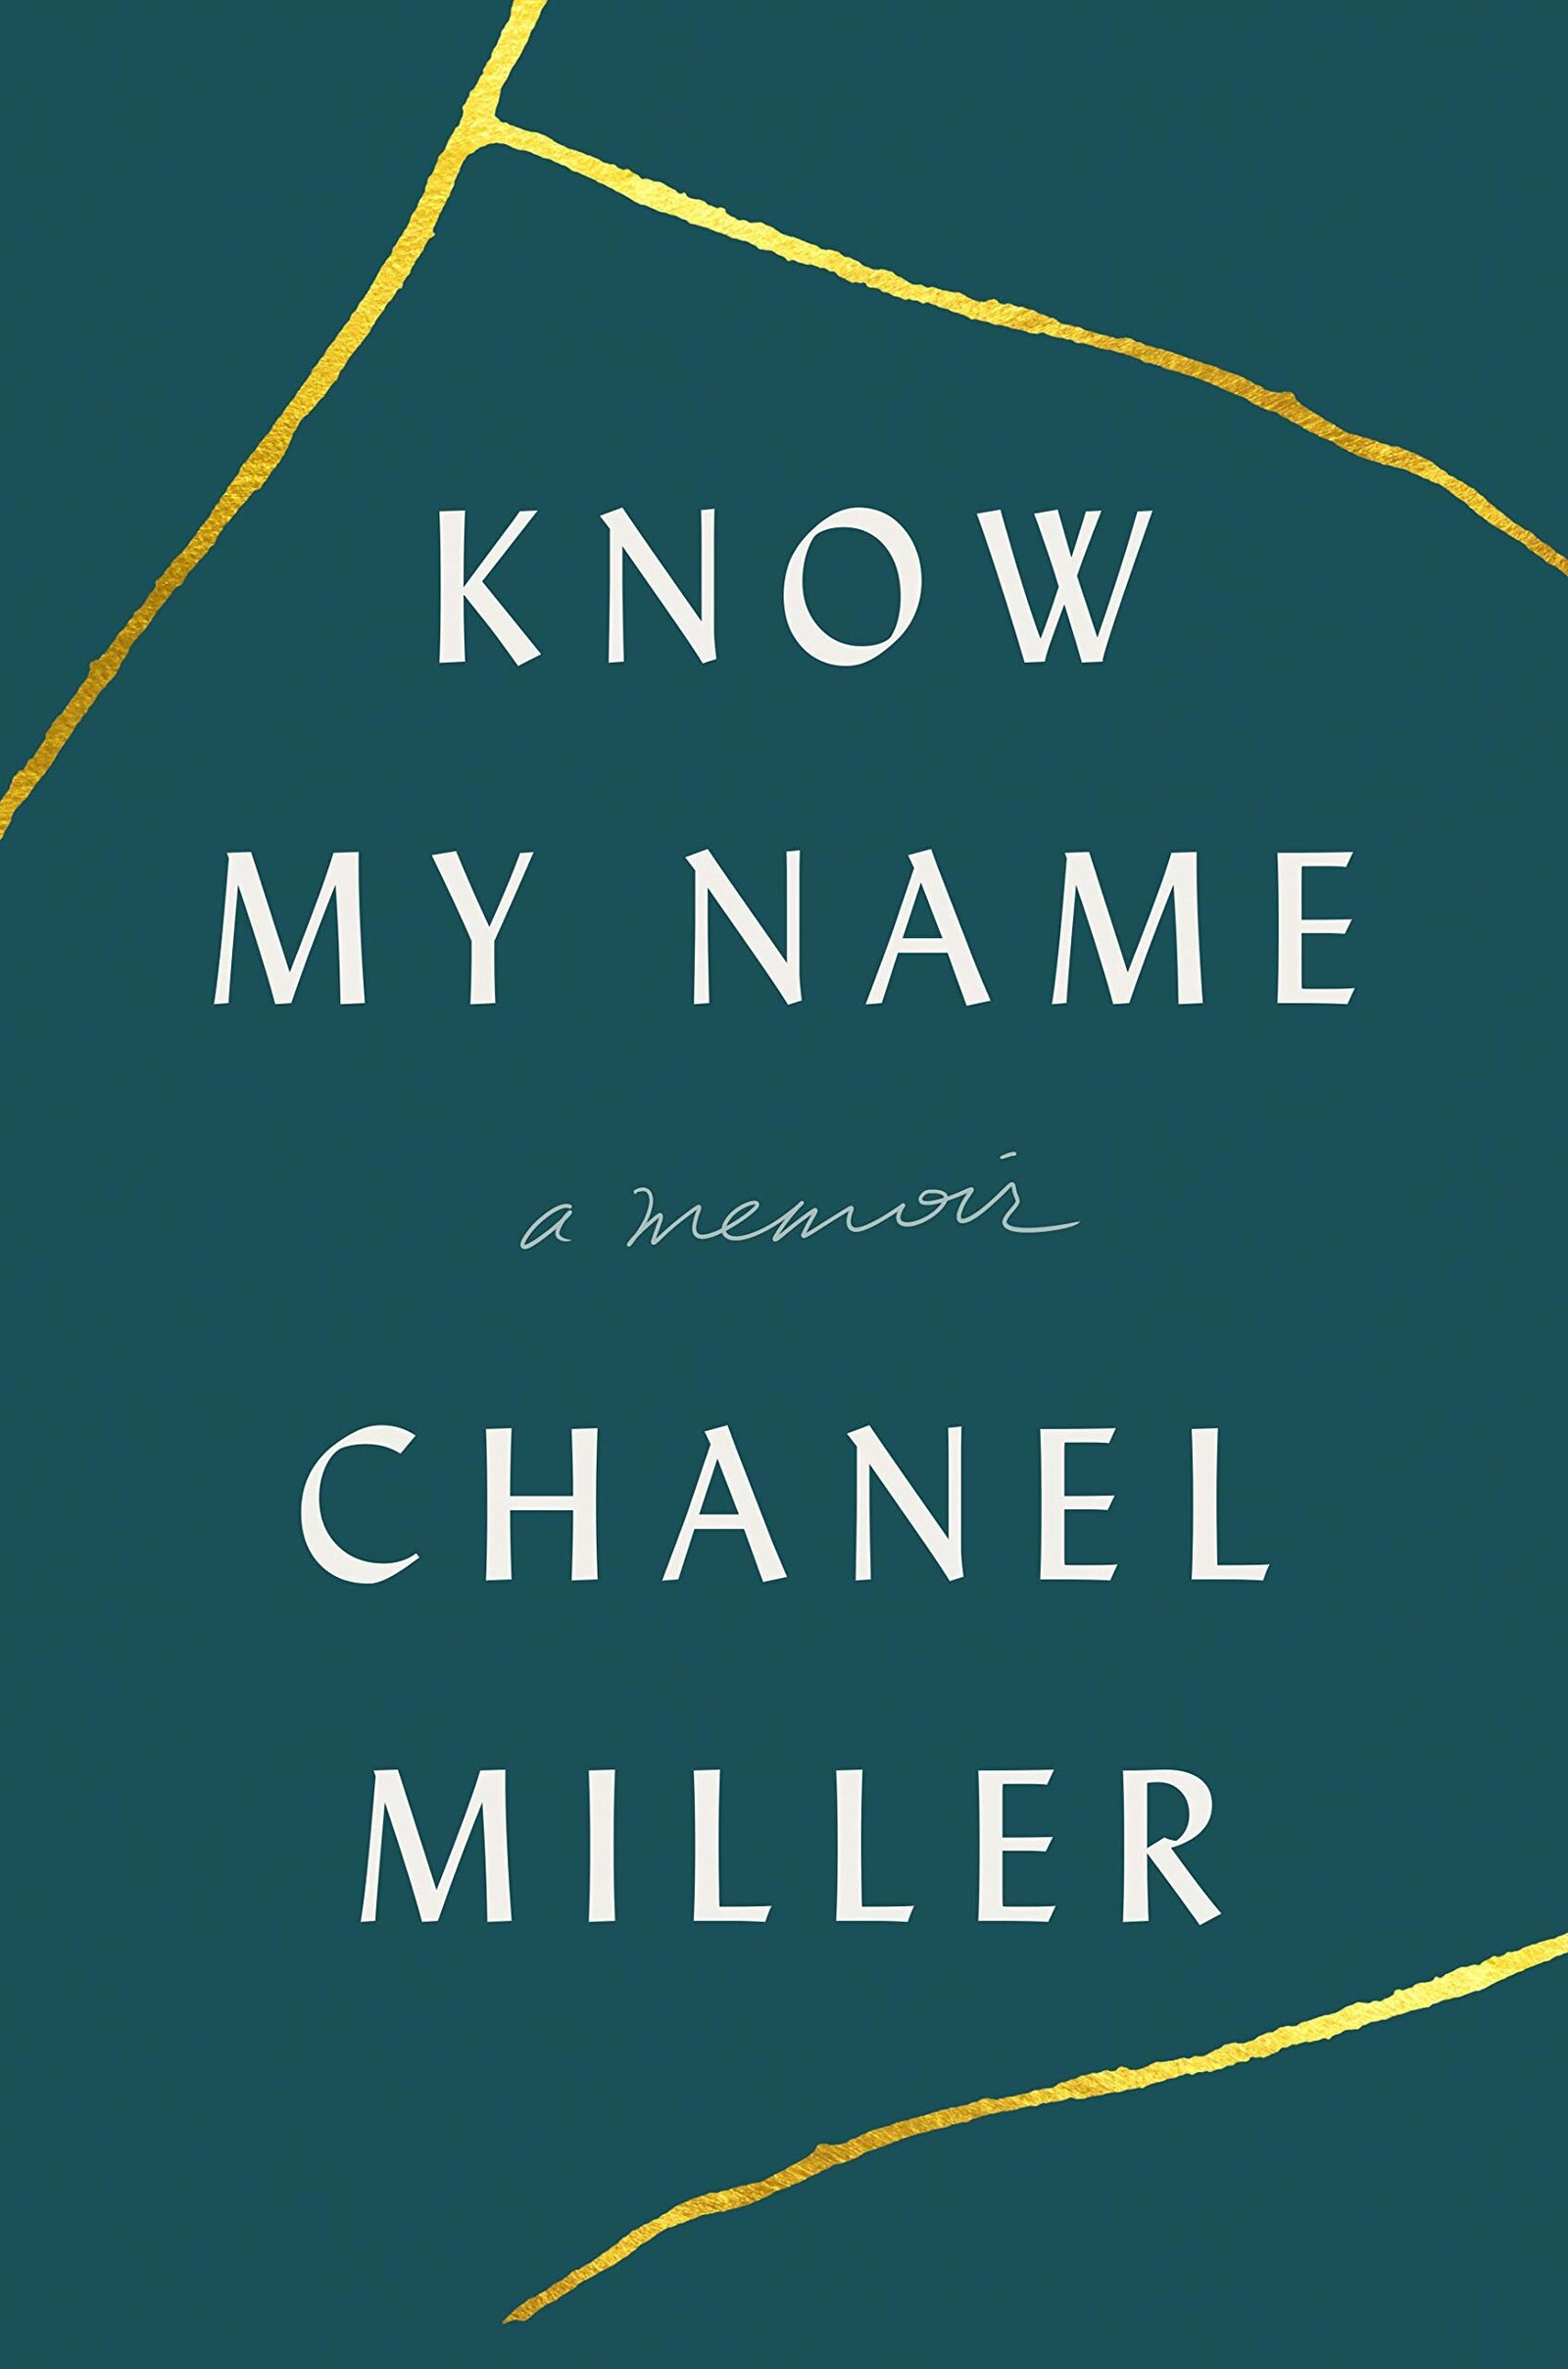 book_chanel_miller_know_my_name